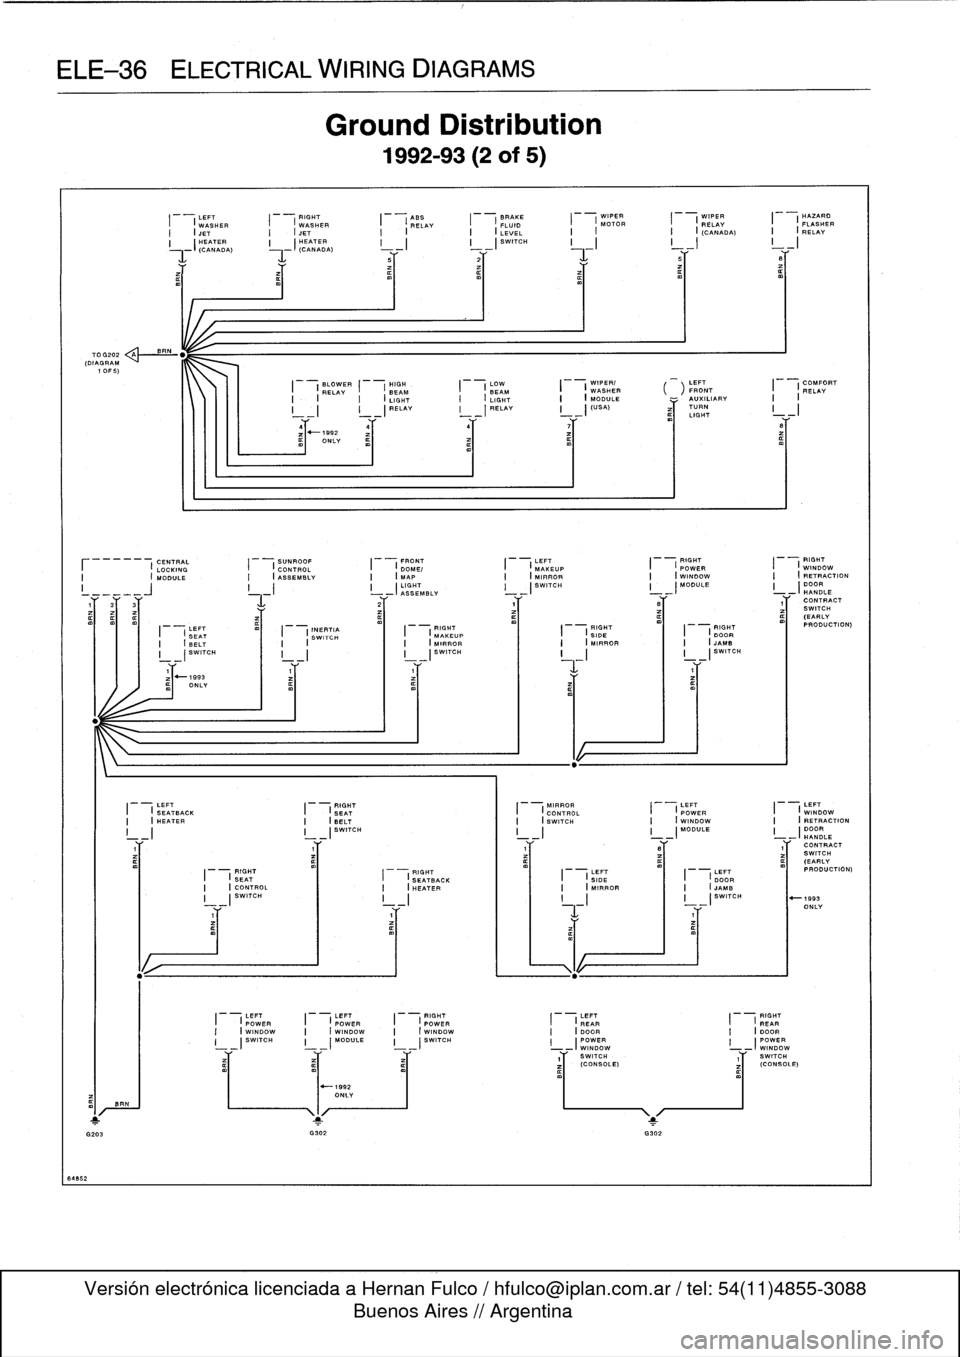 BMW 323i 1995 E36 Owners Manual 
ELE-36
ELECTRICAL
WIRING
DIAGRAMS

64852

70G202
(DIAGRAM
1
OF
5)

BR

BRN

LEFT

	

RIGHT

	

ASS

	

BRAKE

	

WIPER

	

WIPER

	

HAZARD
I

	

(
WASHER

	

I

	

(
WASHER

	

I

	

(
RELAY

	

I

